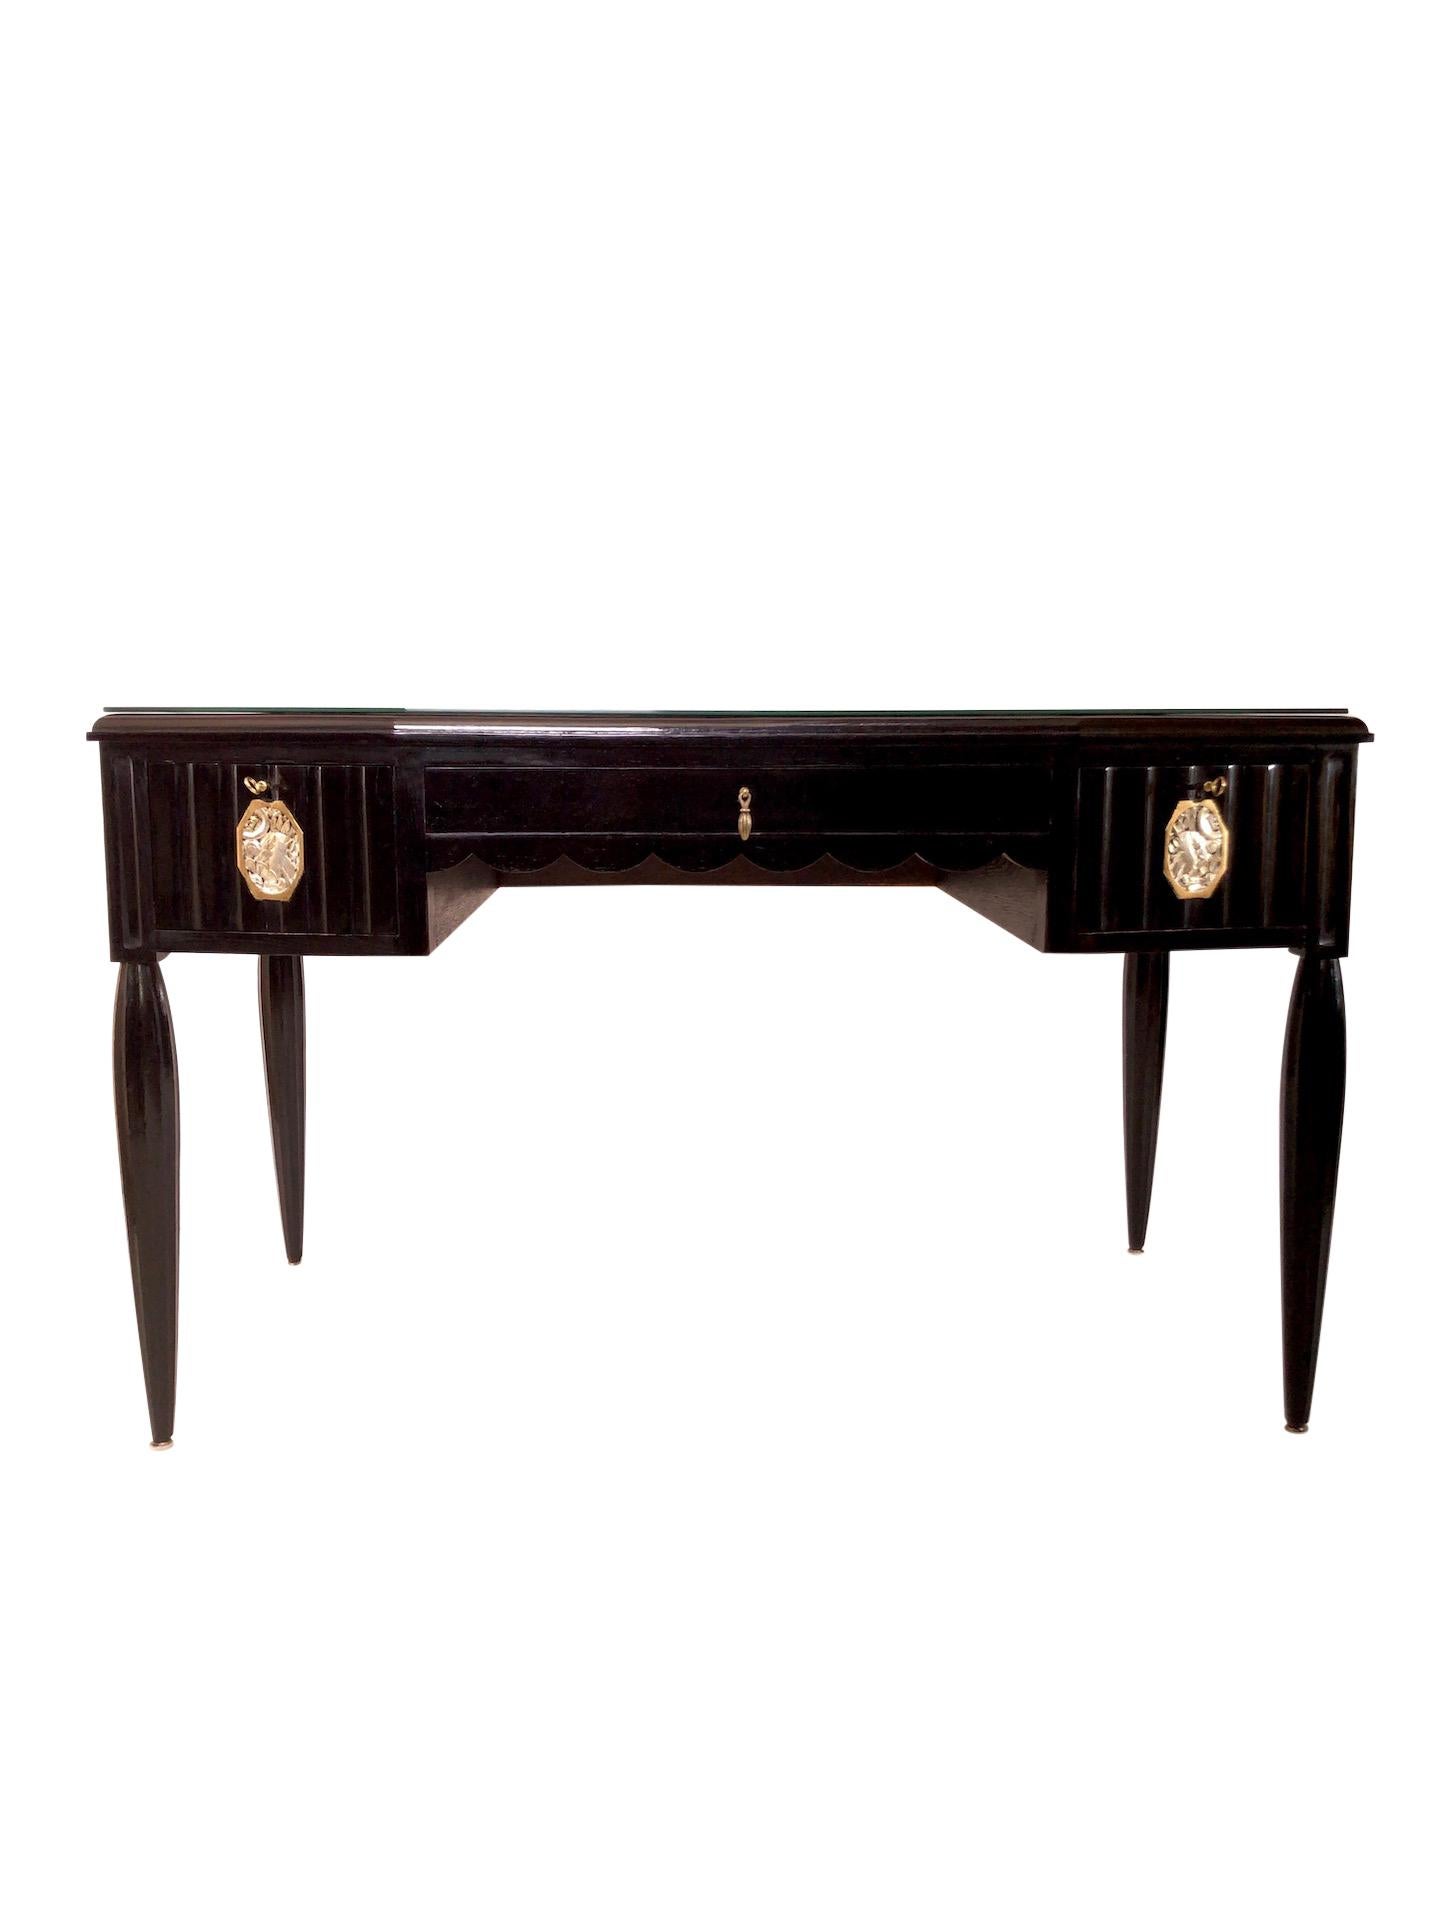 Very detailed desk with typical silver and golden Art Deco pattern.
Shellac hand polish.
The little desk has three drawers.
The two drawers on the sides are with key lock and the middle drawer has a typical fitting.
Channeled front and